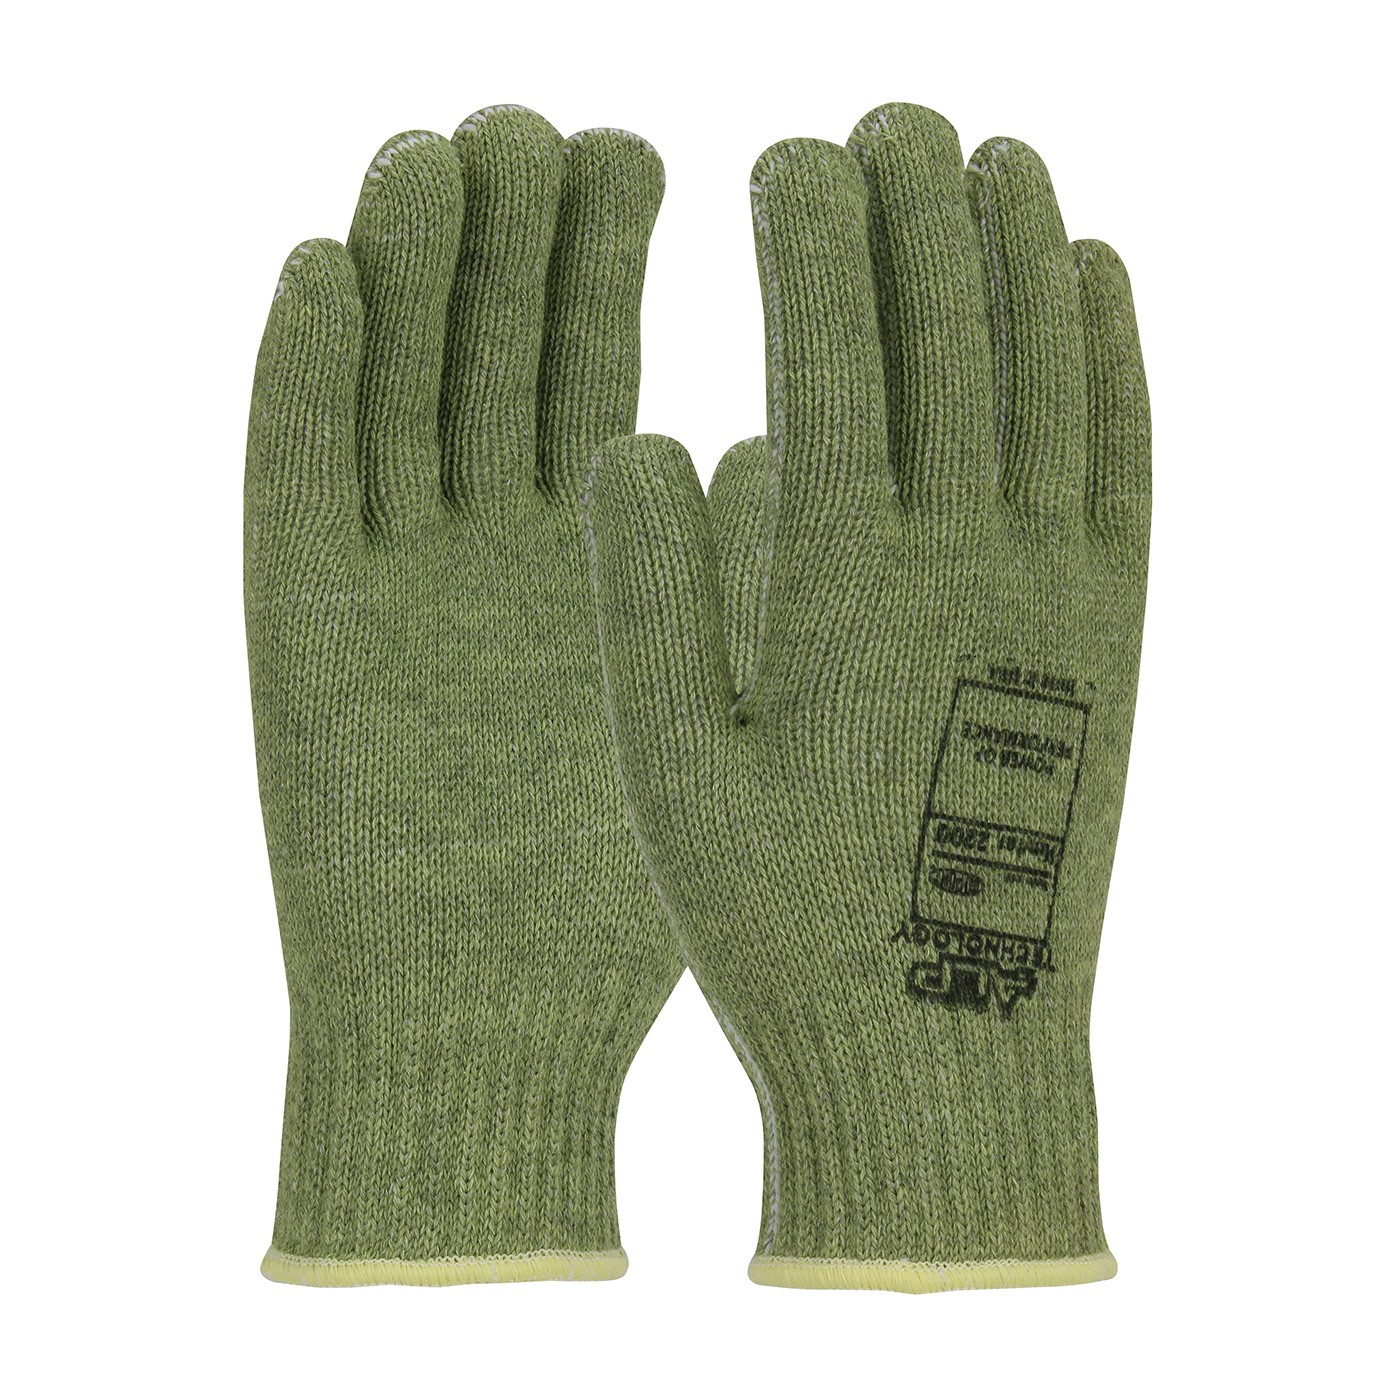 Kut Gard® Seamless Knit ACP / Kevlar® Blended Glove with Polyester Lining - Heavy Weight  (#07-KA700)